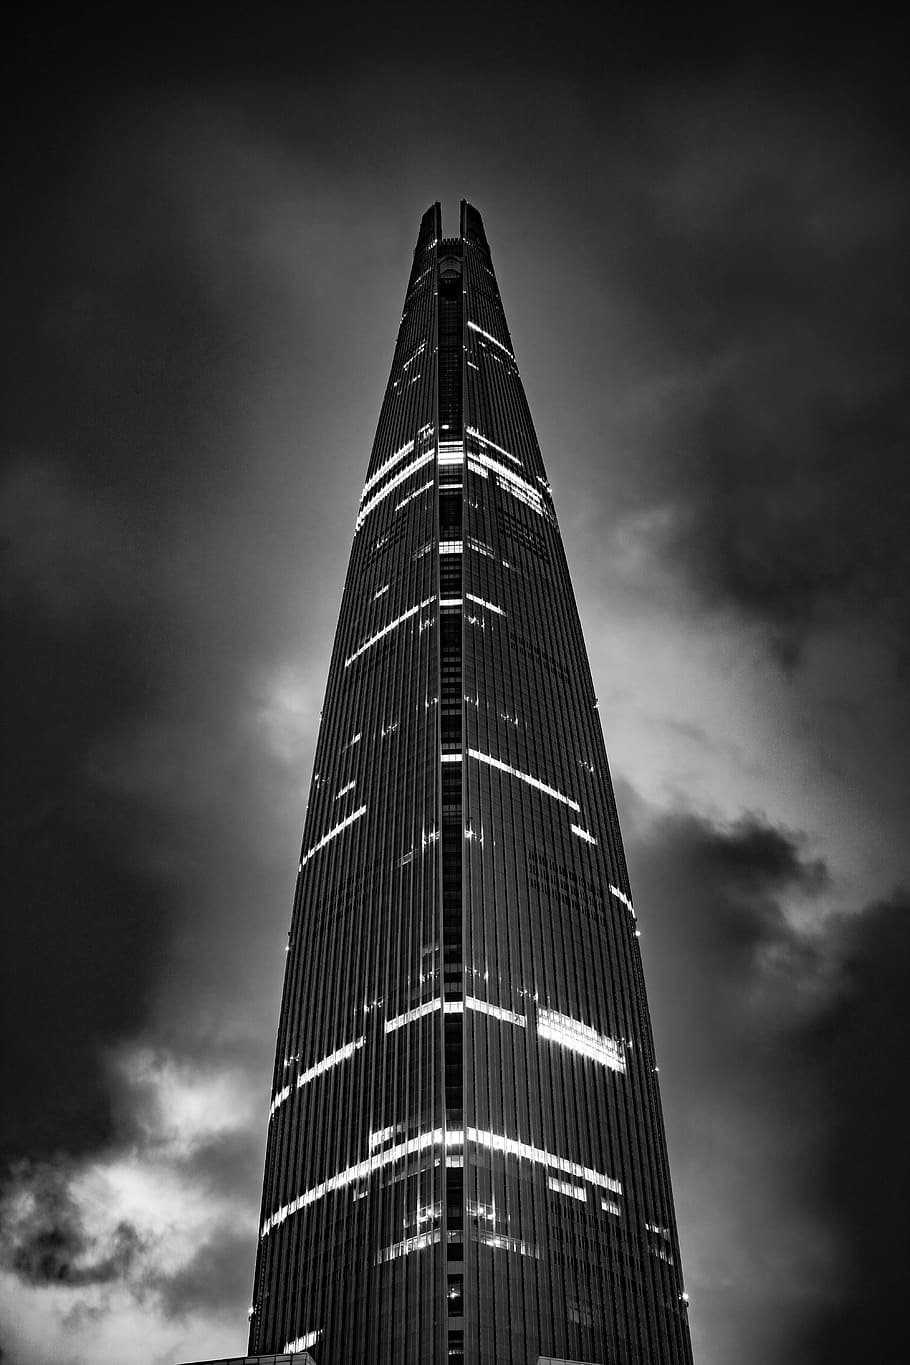 city, building, blackandwhite, tall, dark, architecture, sky, building exterior, built structure, tall - high